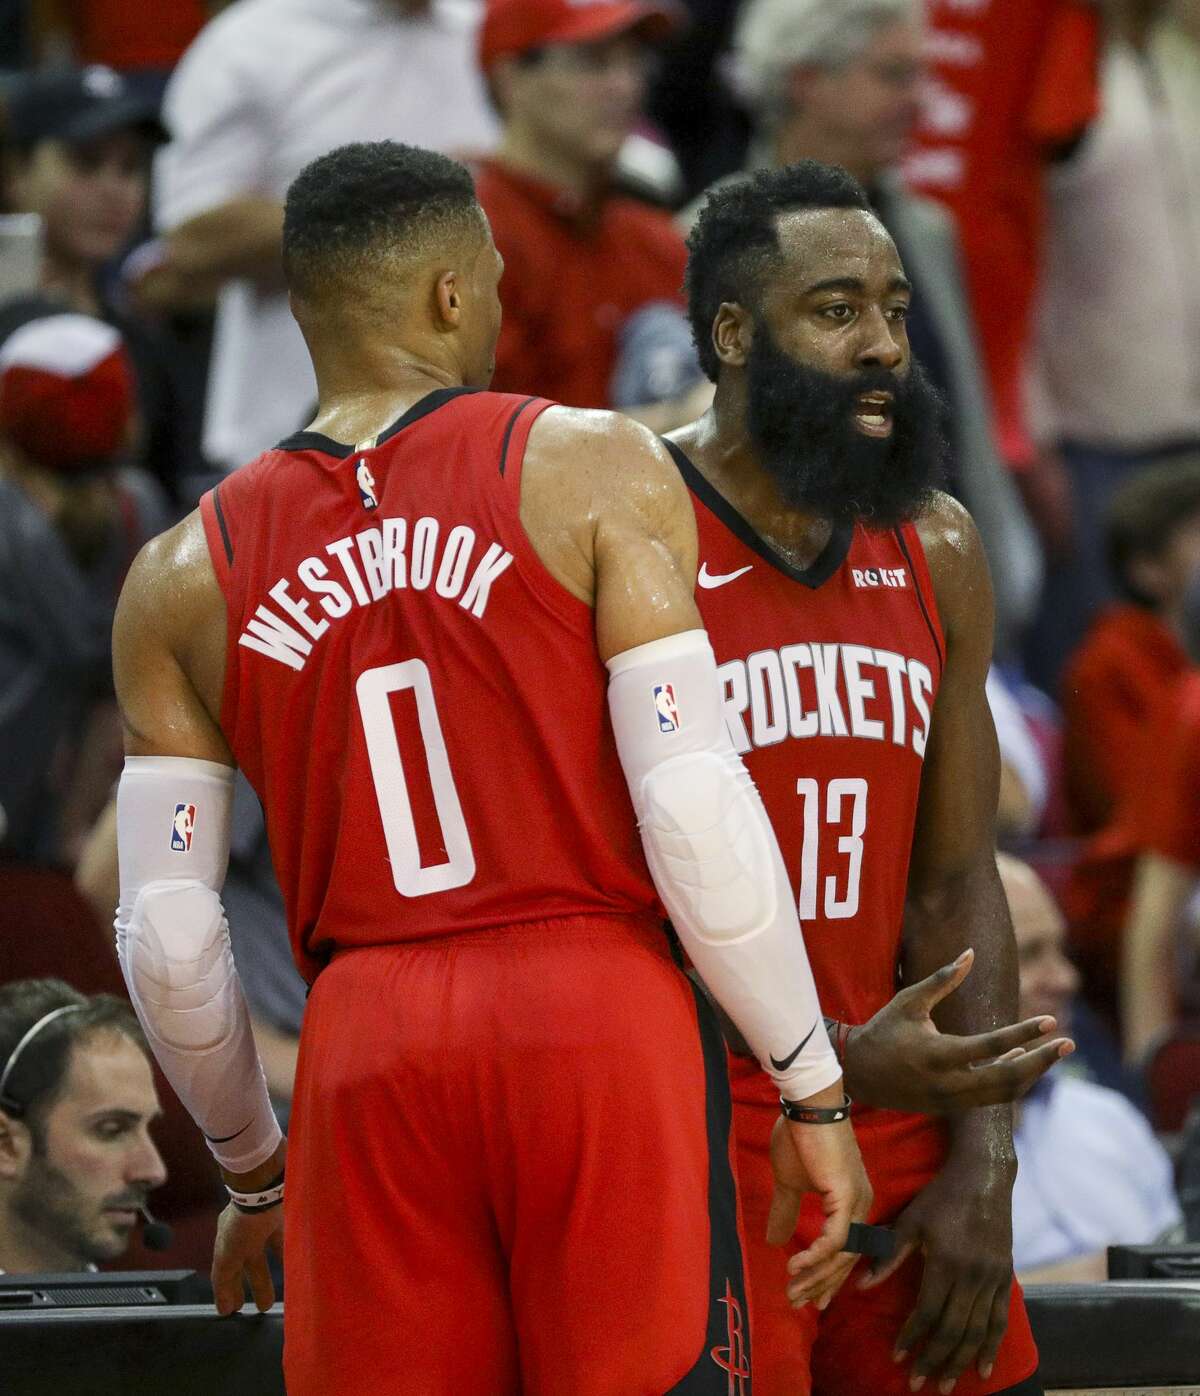 Houston Rockets guard James Harden (13) and guard Russell Westbrook (0) talk during a timeout during the fourth quarter of an NBA basketball game at the Toyota Center on Sunday, Nov. 24, 2019, in Houston.